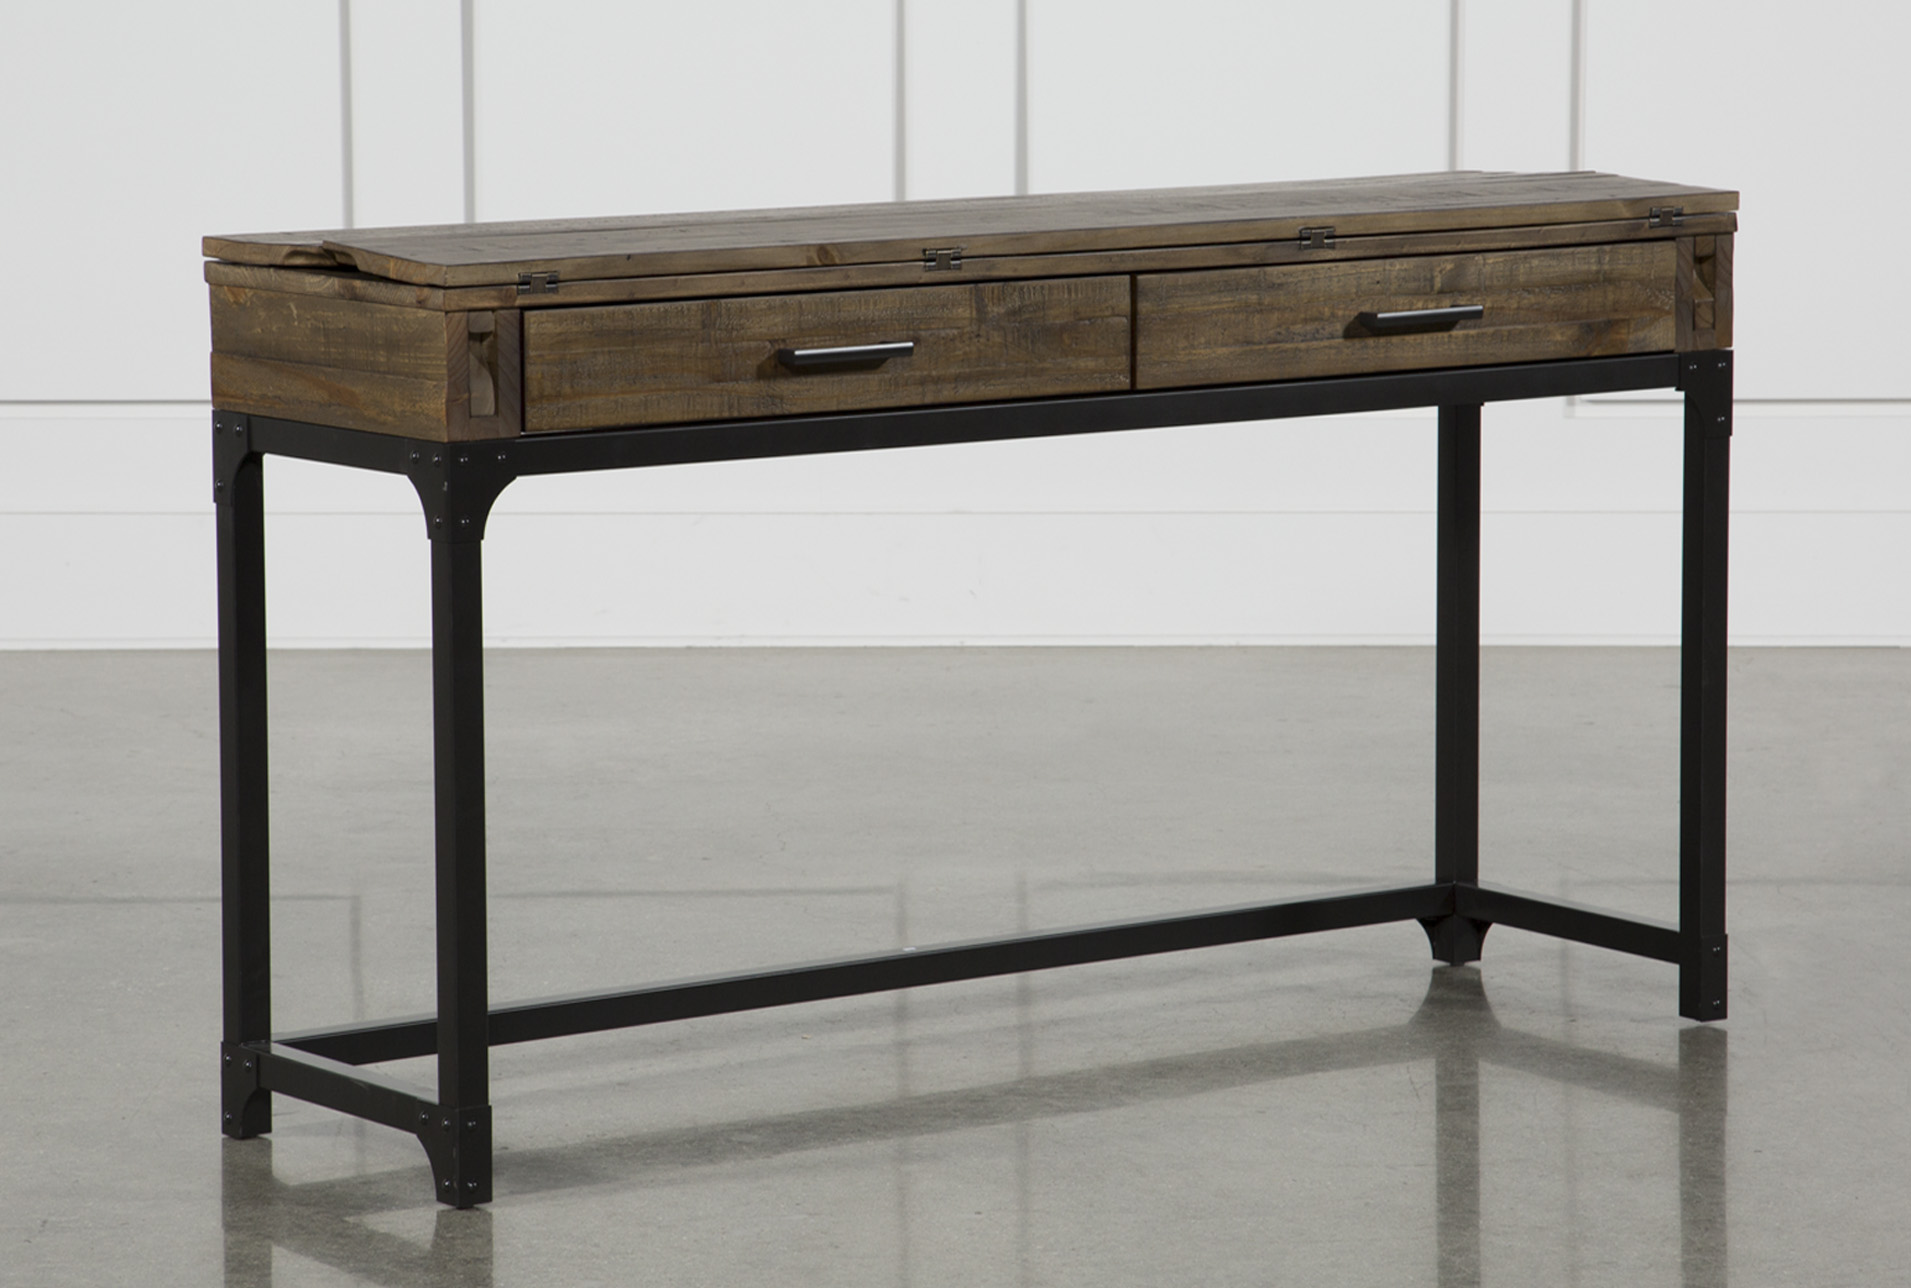 Foundry Flip-Top Sofa Table (Qty: 1) has been successfully added to your  Cart.